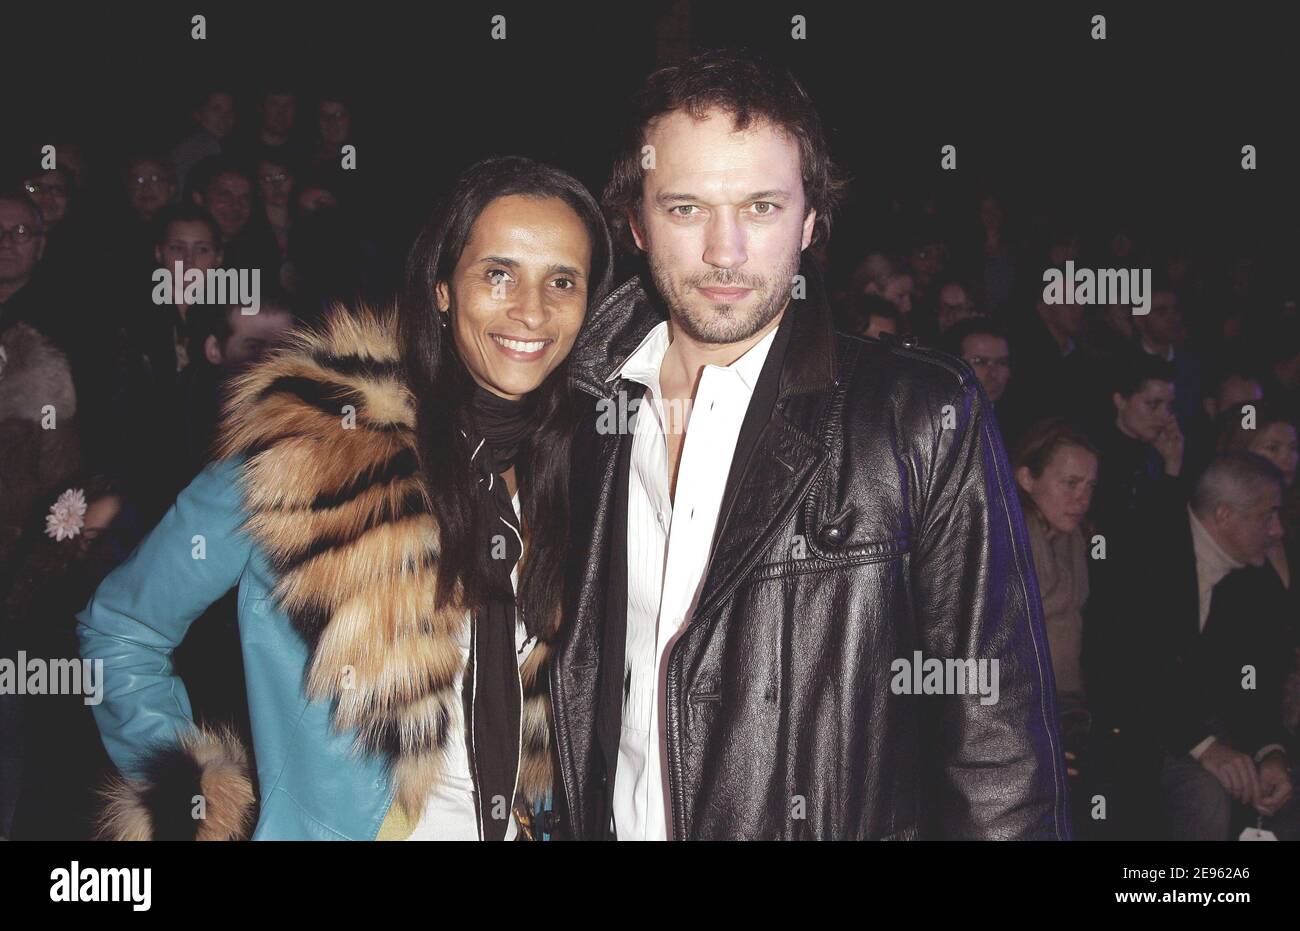 Swiss actor Vincent Perez and his wife Karine Sylla during John Galliano's Fall-Winter 2006-2007 Ready-to-wear collection presentation held at 'Dock Eiffel' in Paris, France, on March 4, 2006. Photo by Taamallah-Orban-Zabulon/ABACAPRESS.COM Stock Photo